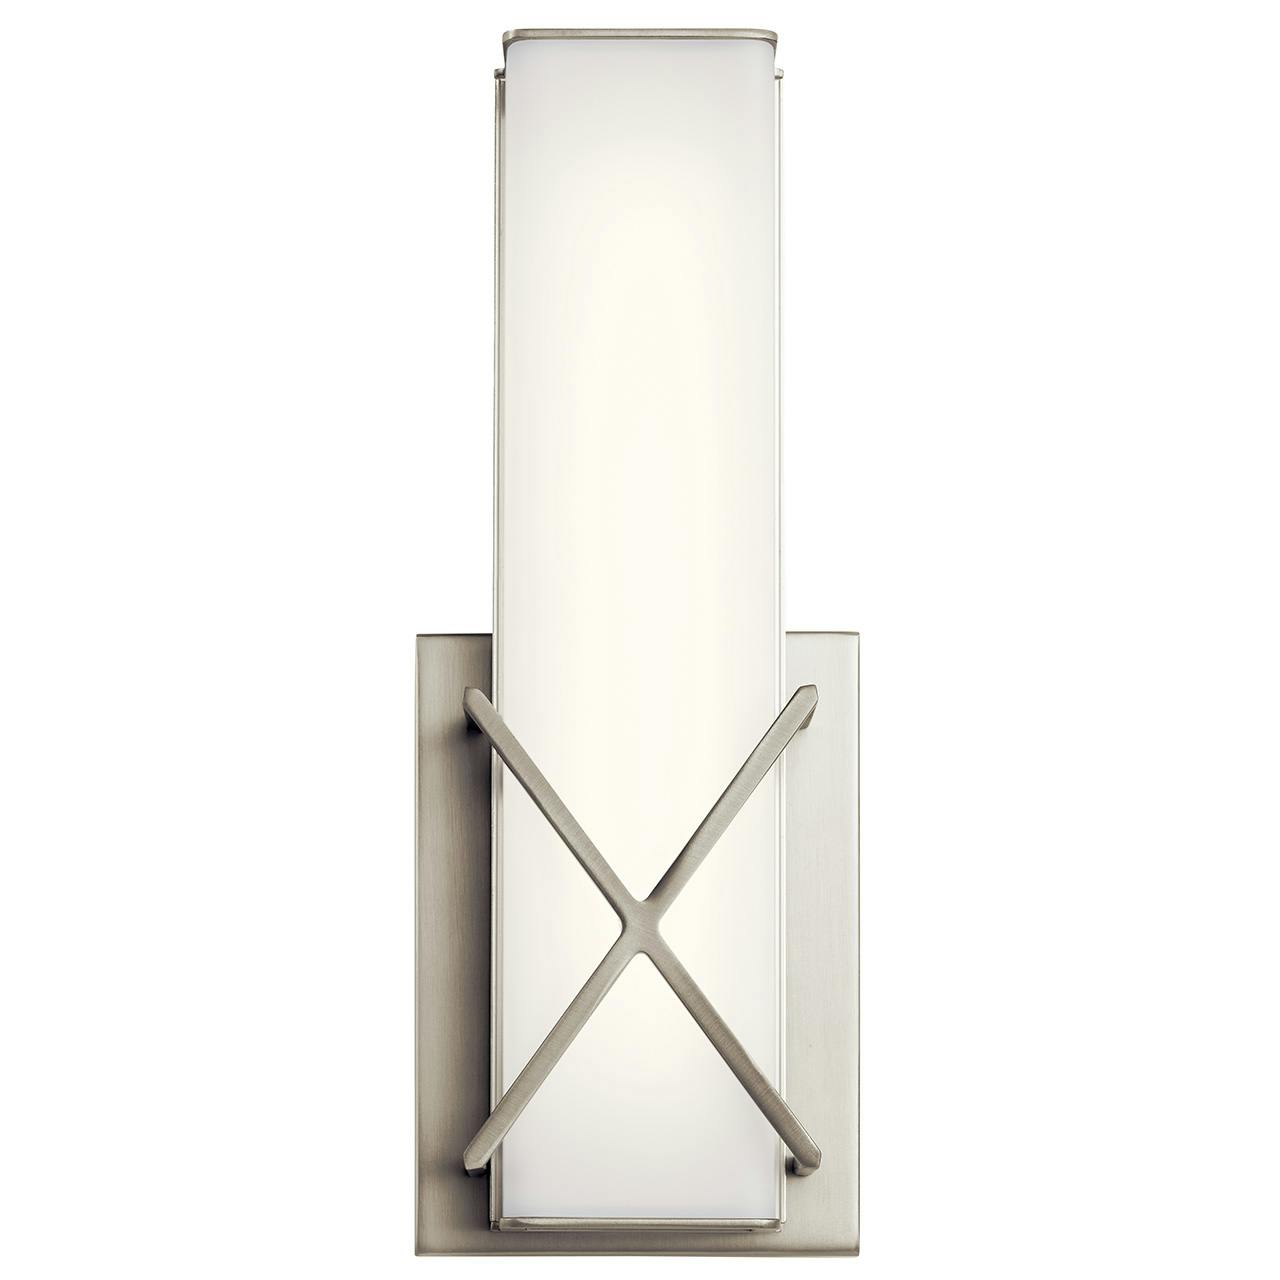 Front view of the Trinsic™ LED Wall Sconce Nickel on a white background